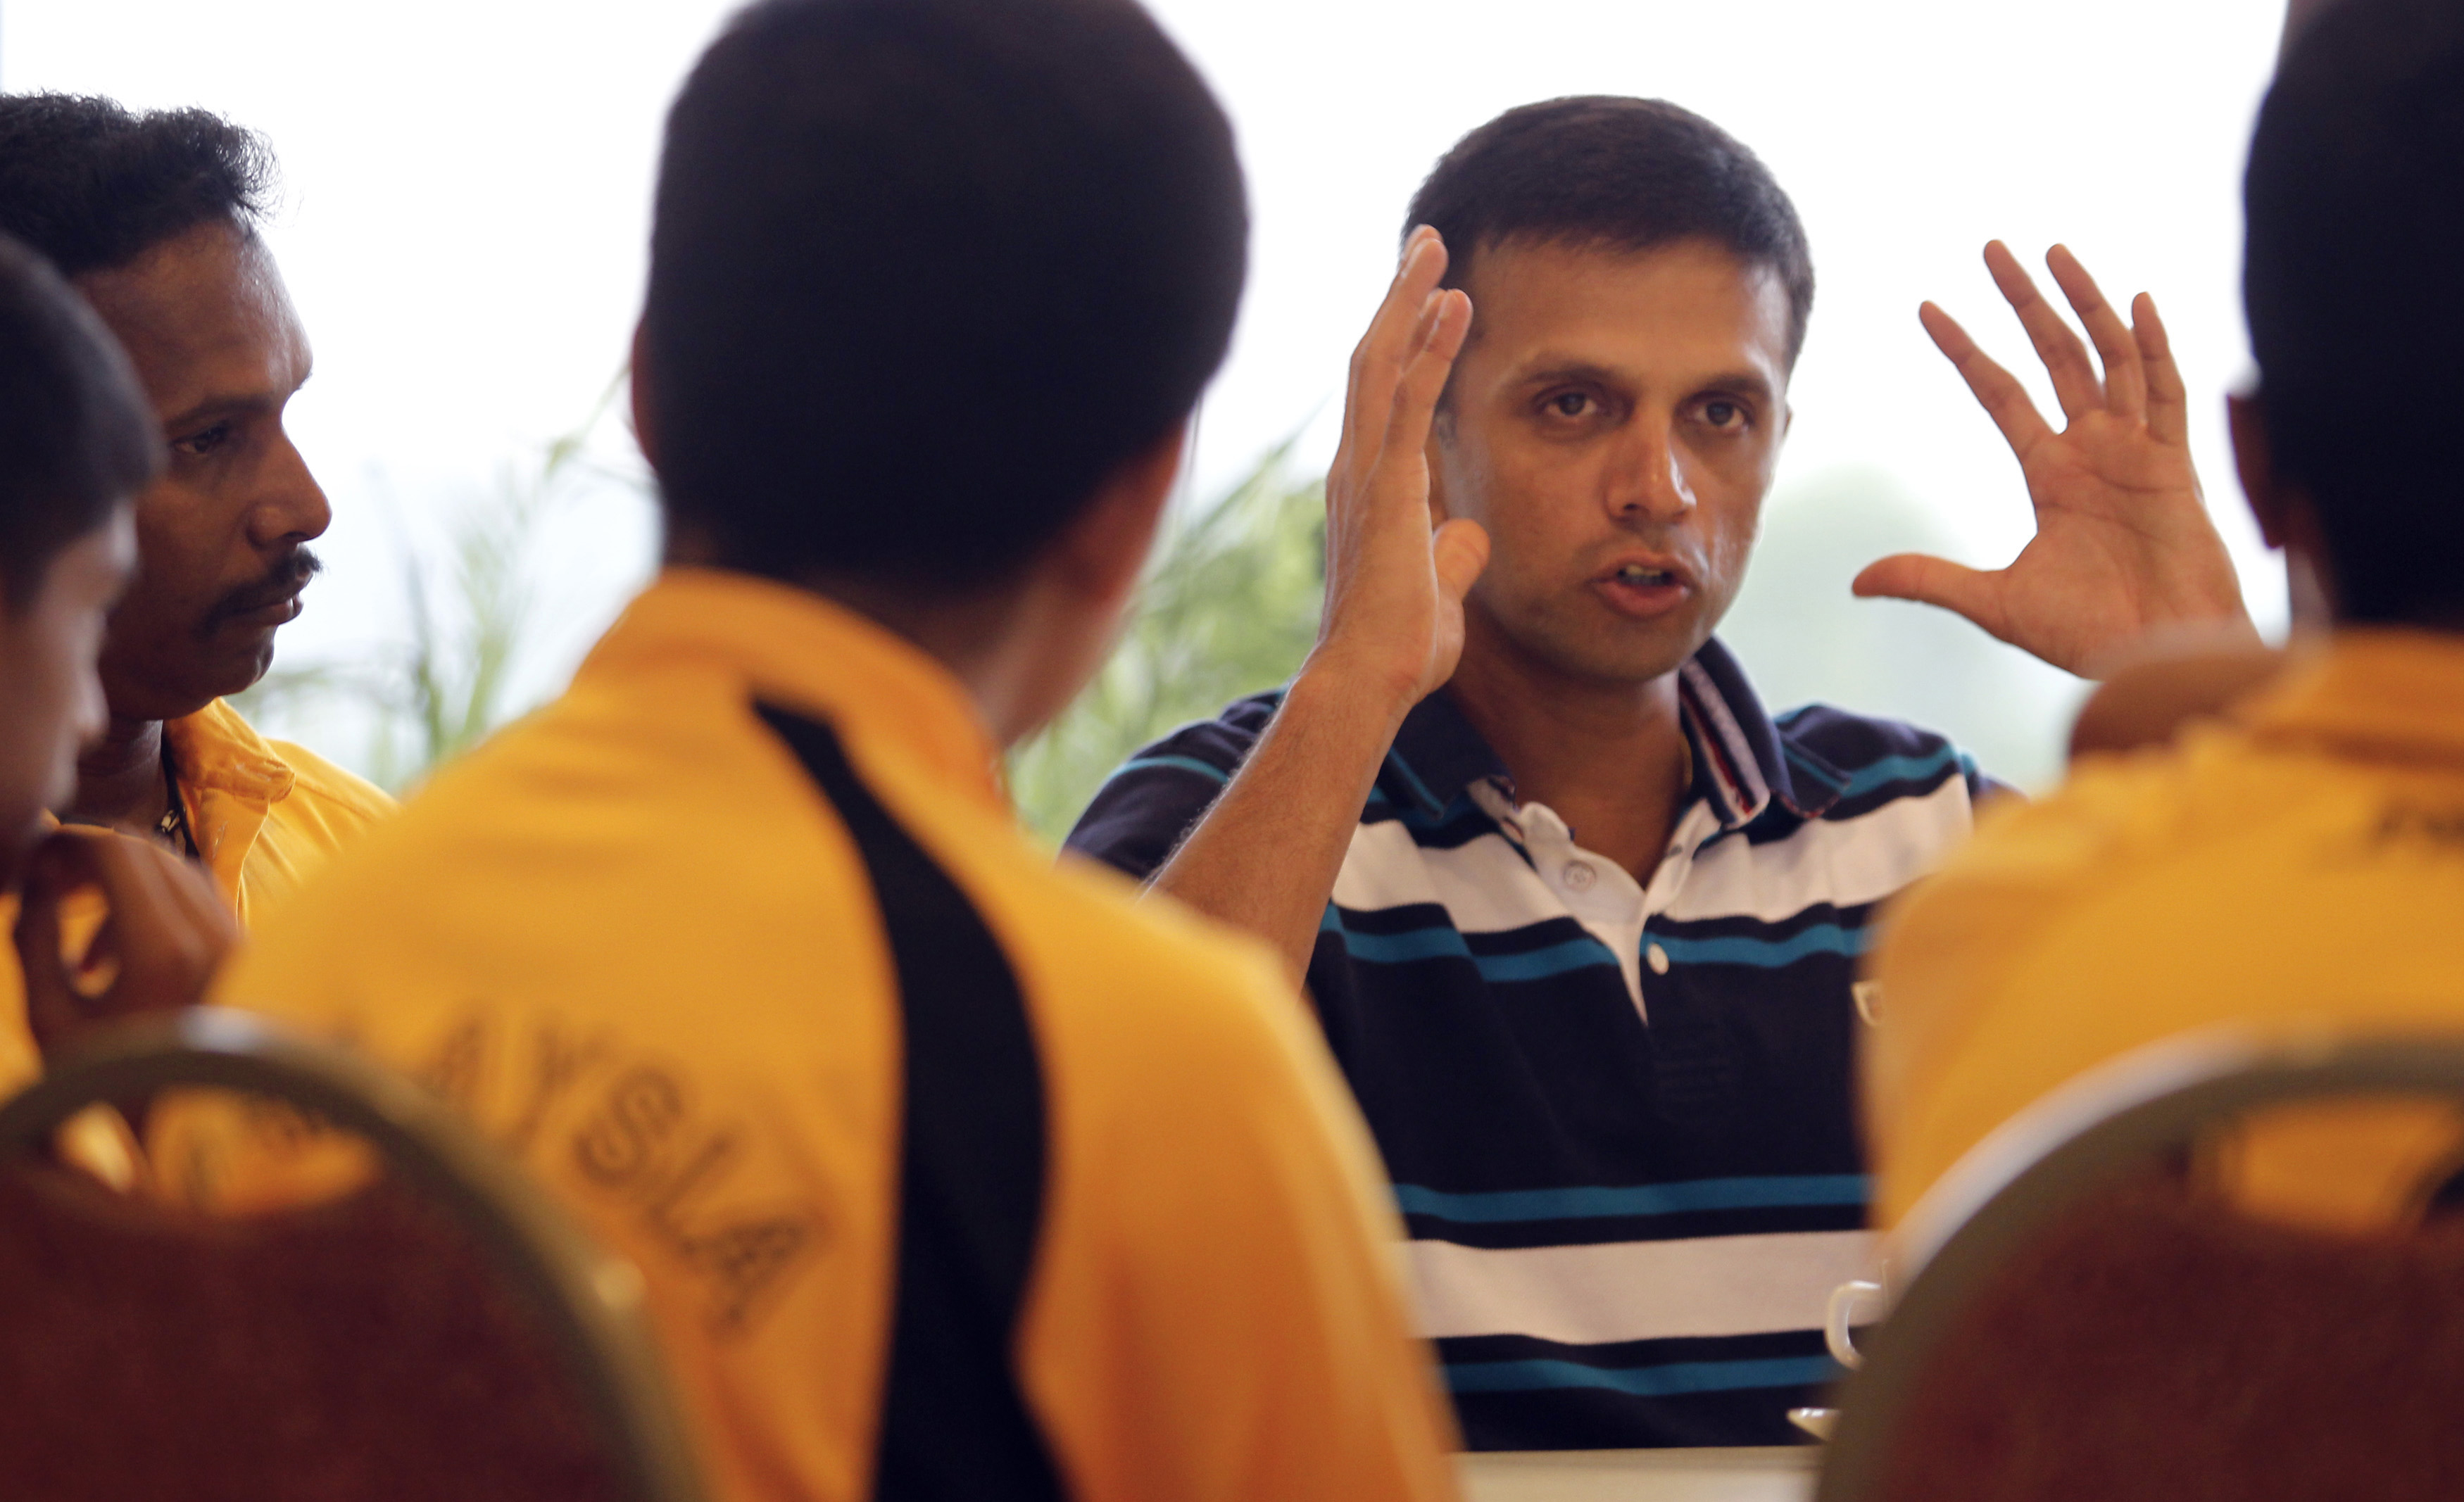 Former Indian cricket captain Rahul Dravid (R) speaks to Malaysian U-16 cricketers during a cricket clinic in Kuala Lumpur June 27, 2012. REUTERS/Bazuki Muhammad 